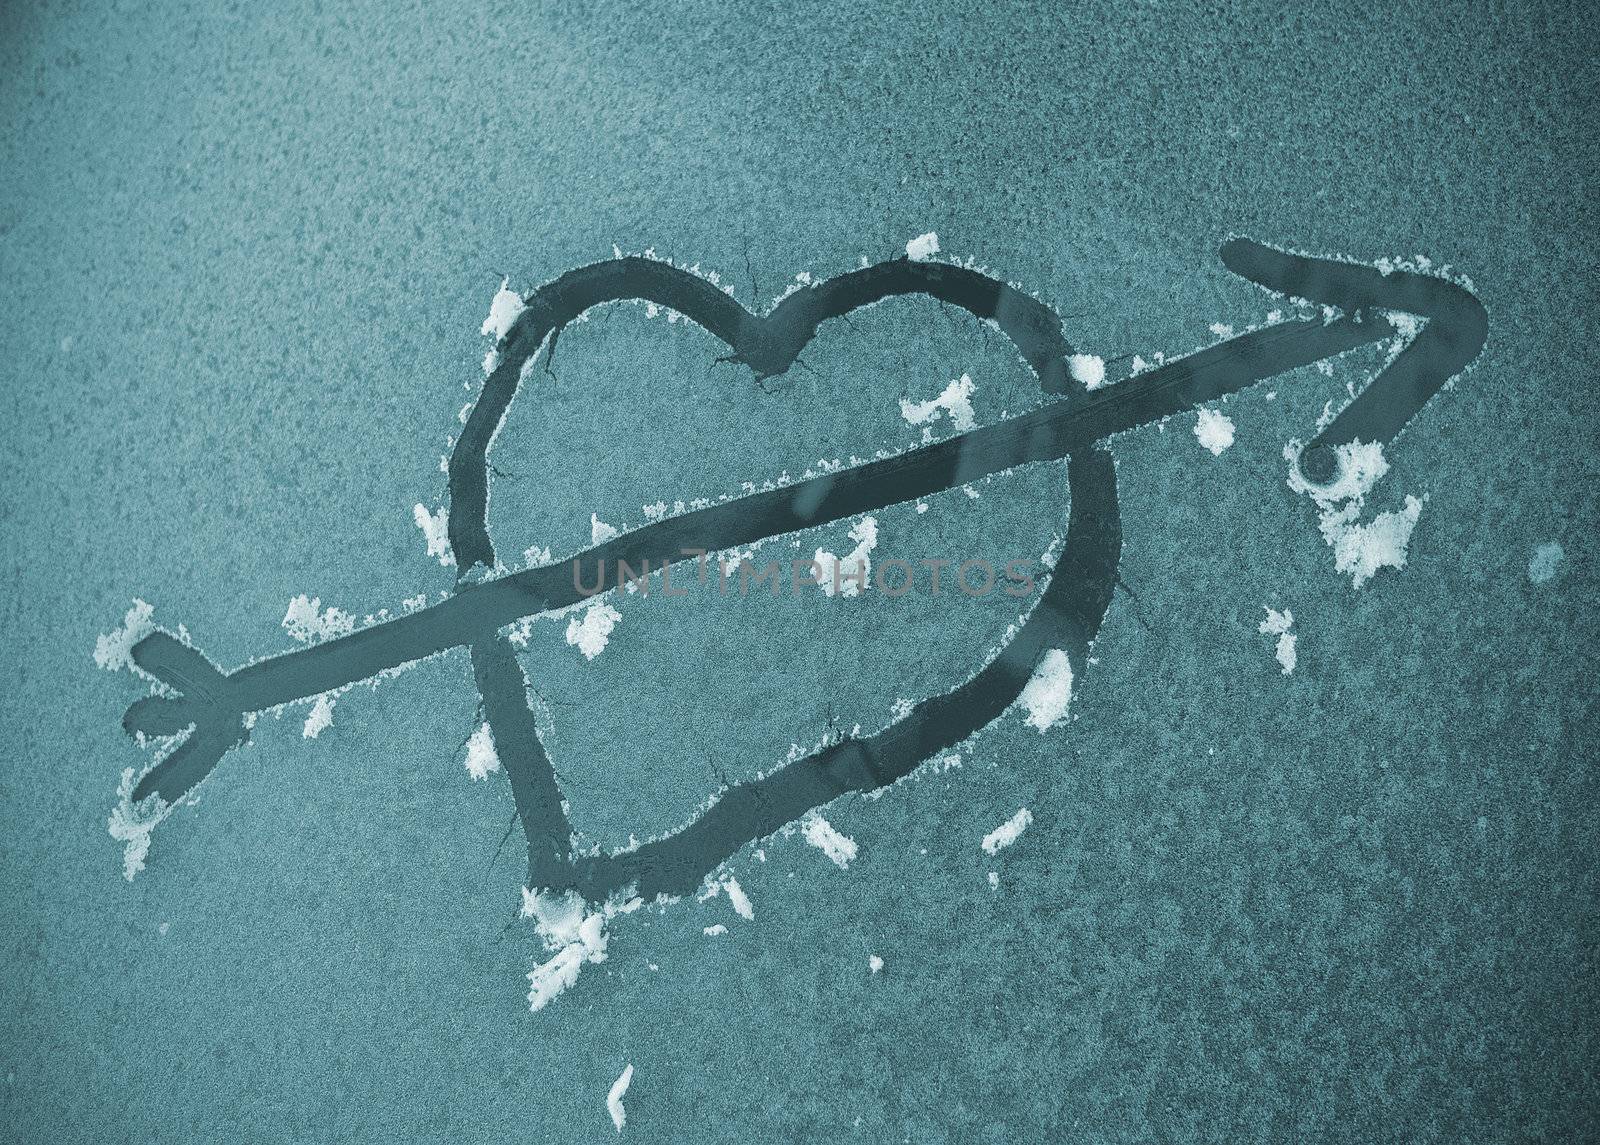 Heart with arrow scraped on a frozen automobile windscreen in the morning.